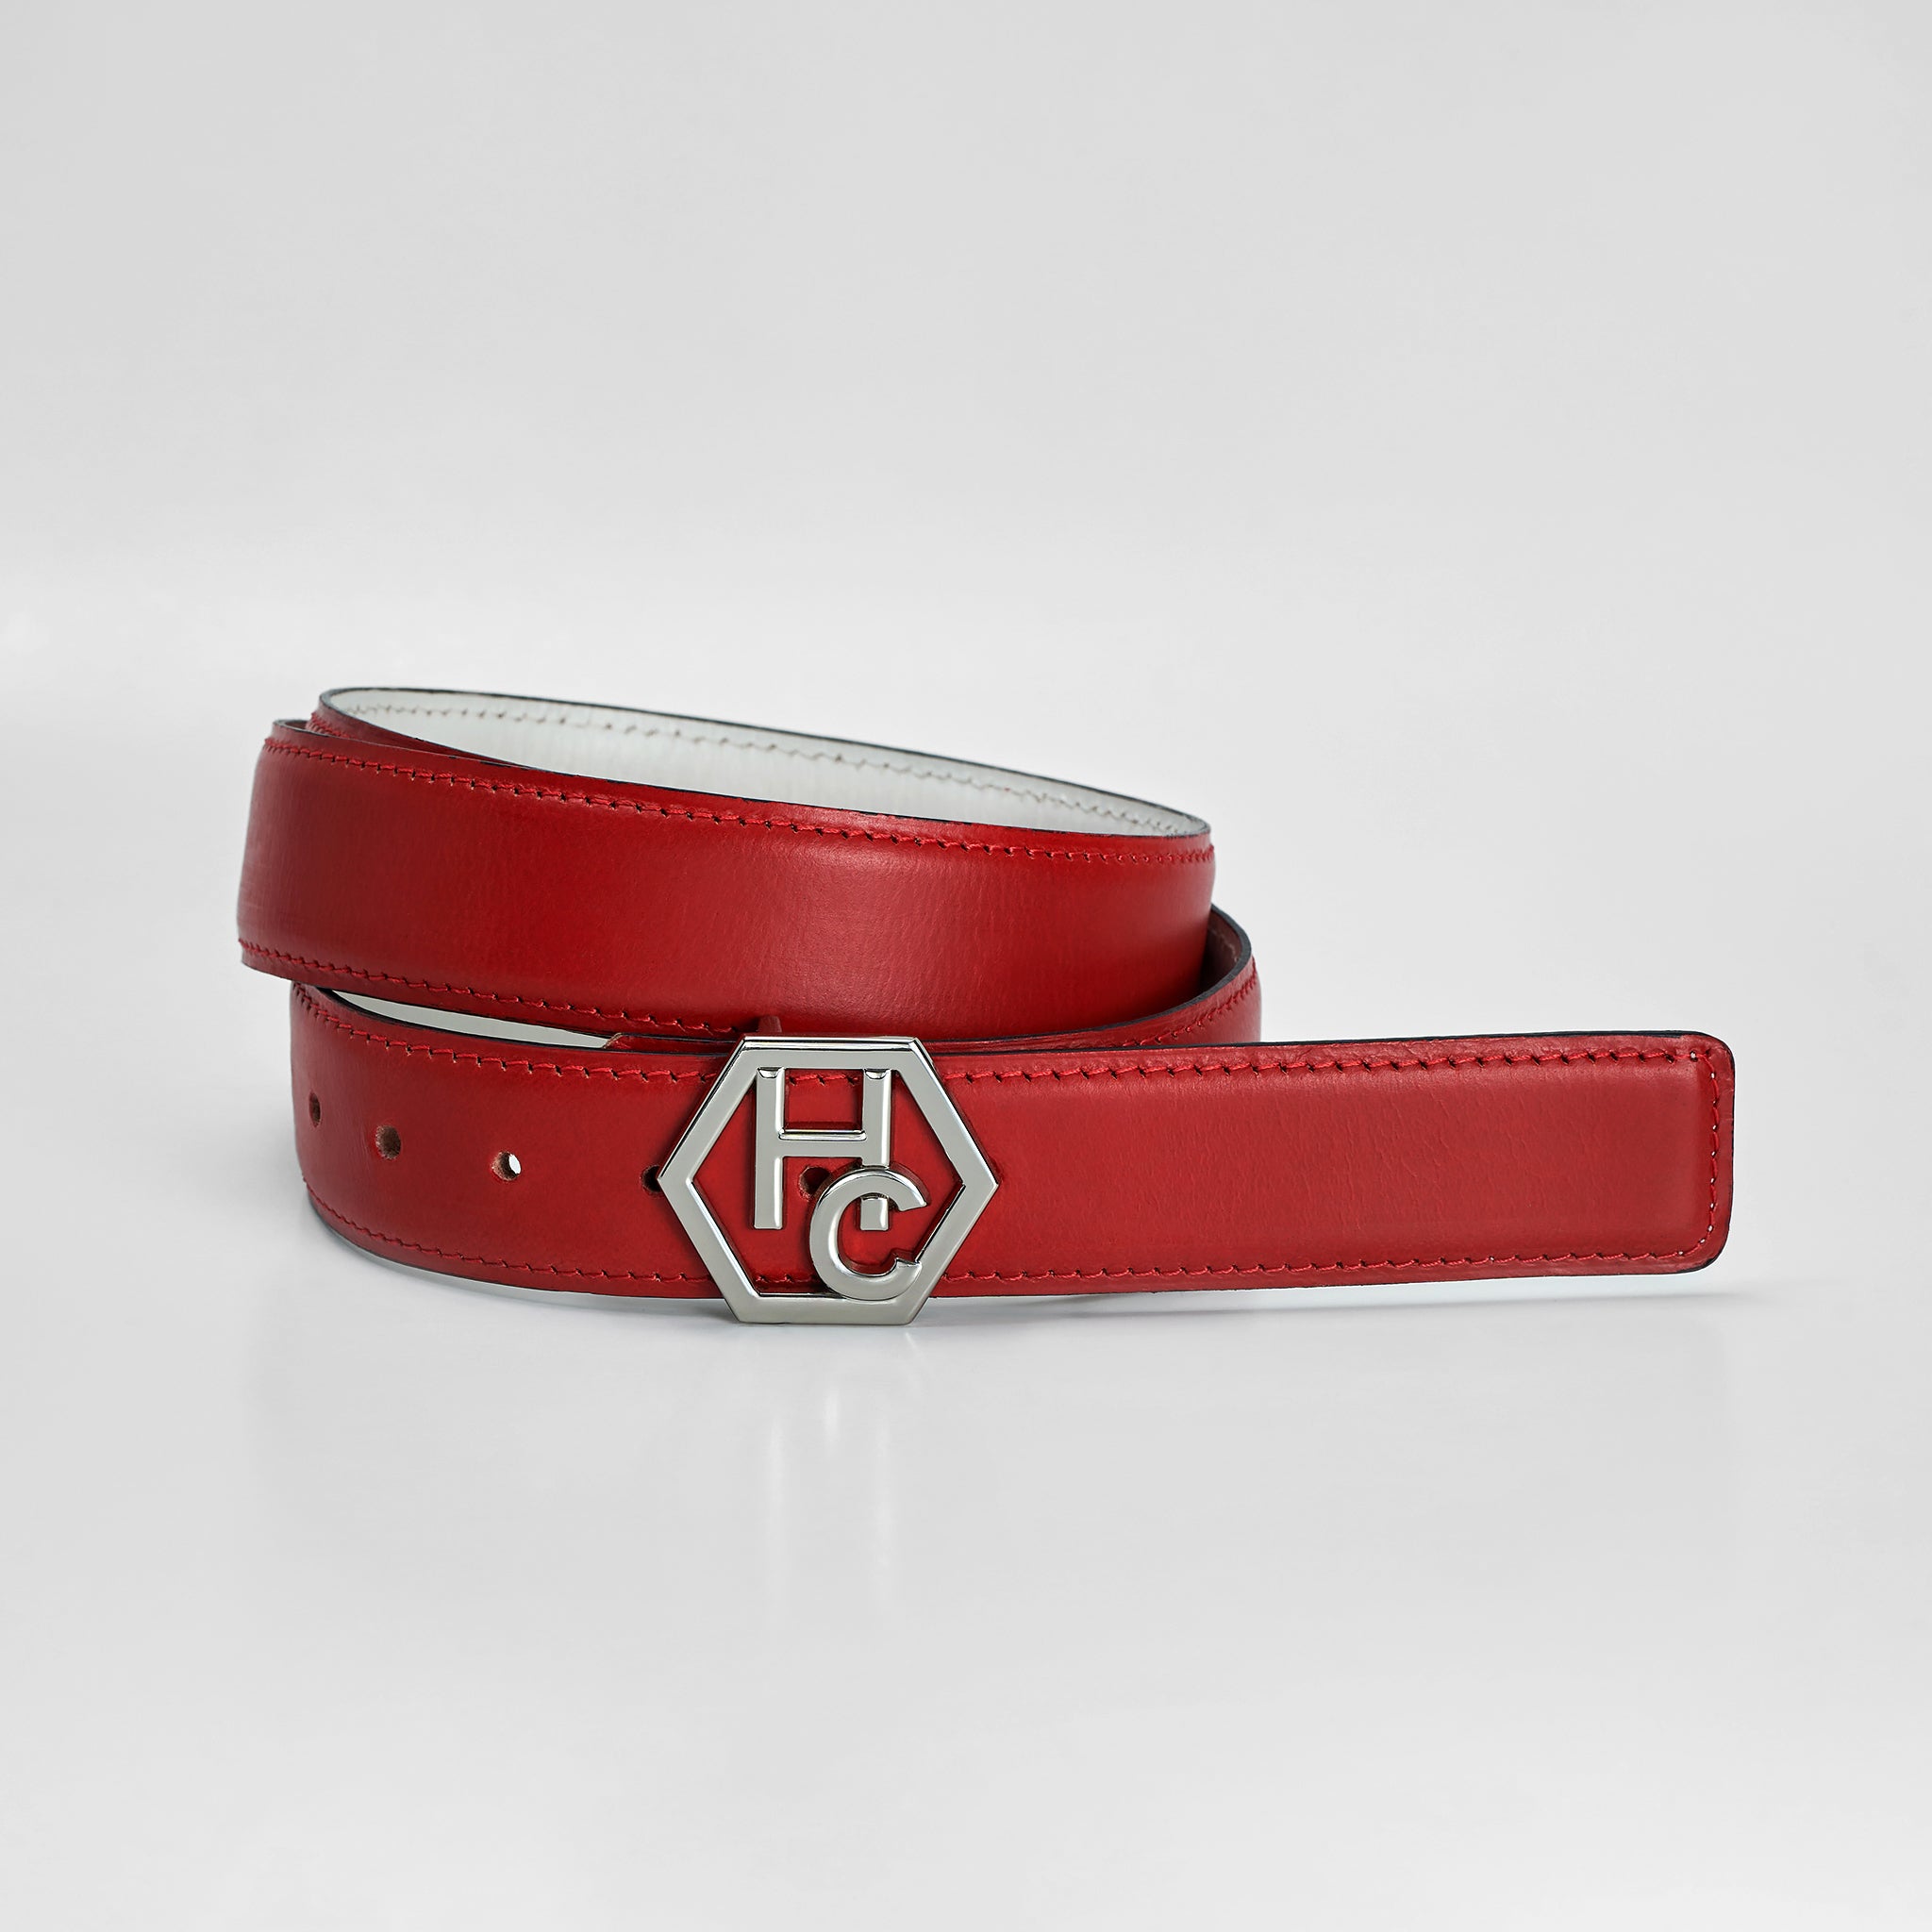 Hedonist Chicago Reversible Red Leather Belt 1.3" 32381073424535